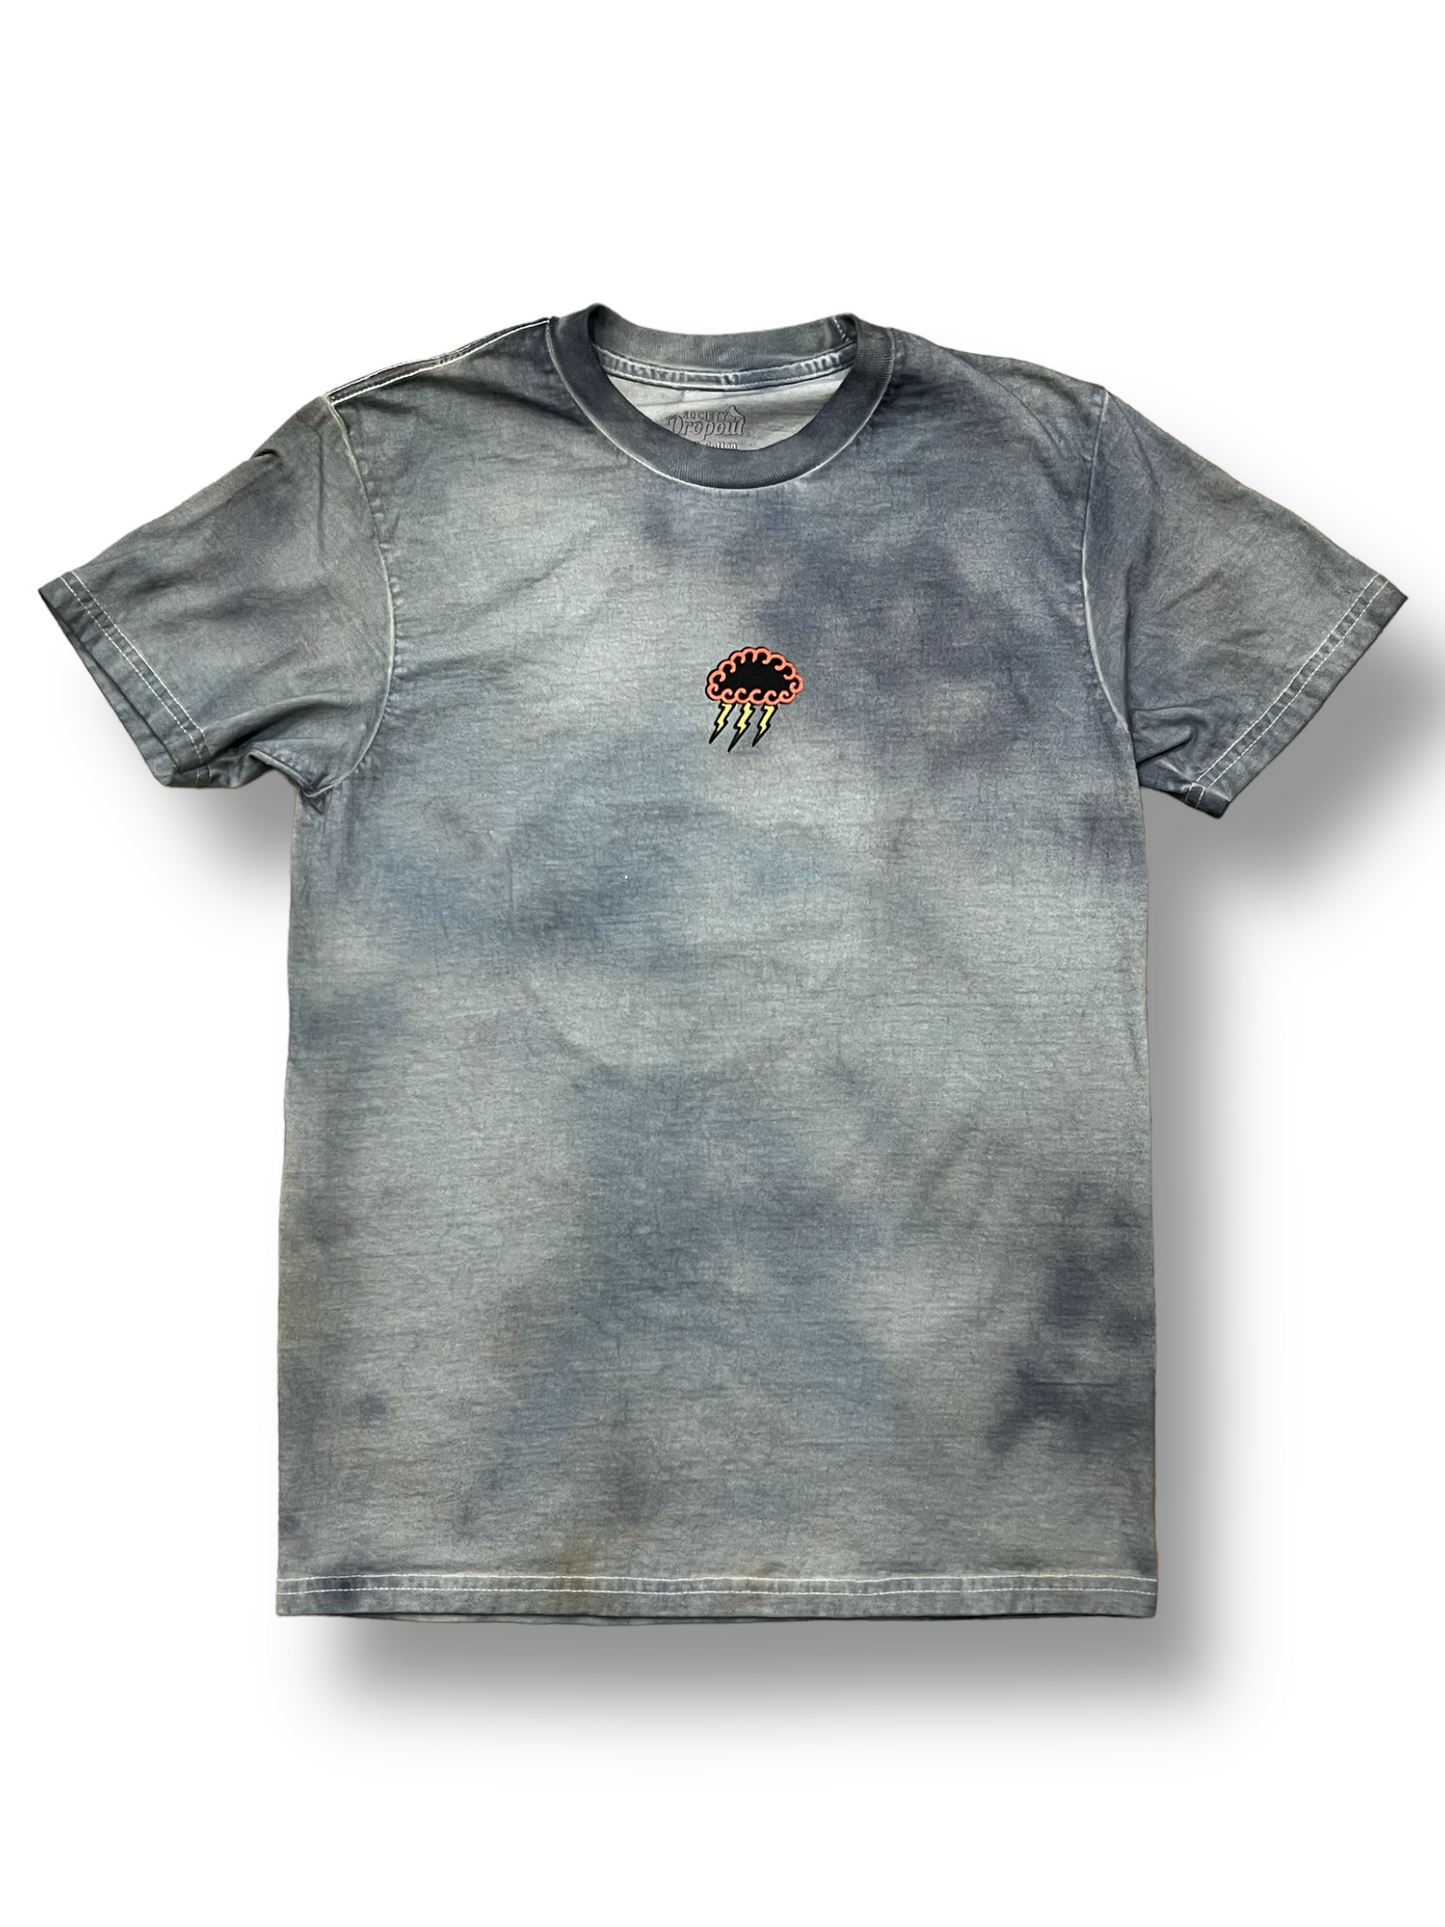 CALM BEFORE THE STORM- ICE DYE T-SHIRT